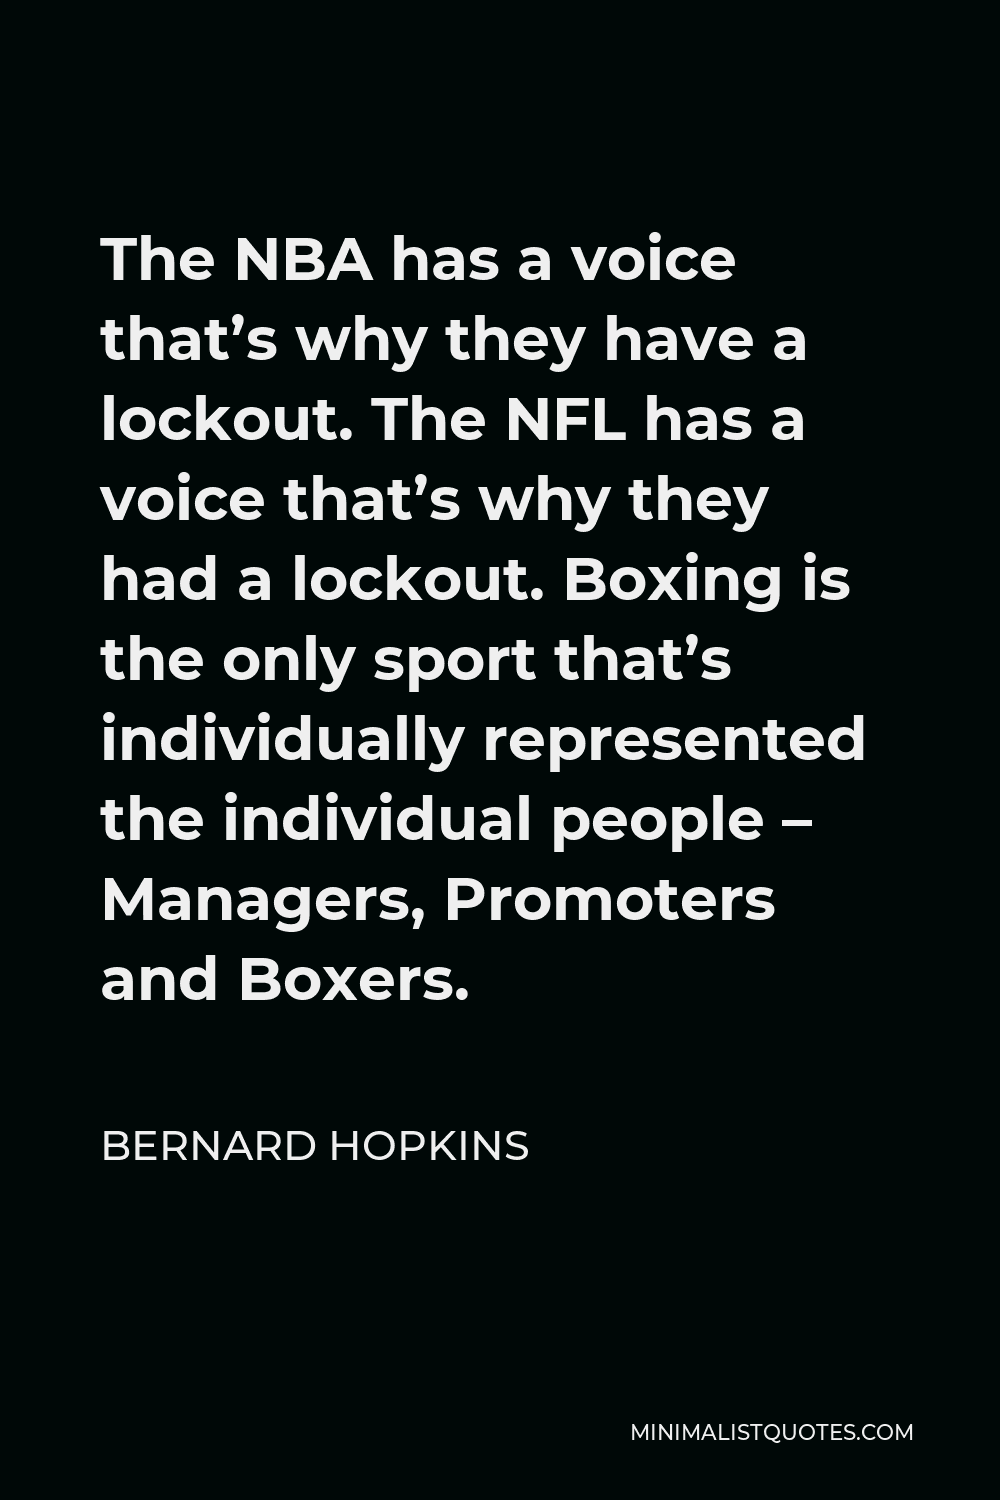 Bernard Hopkins Quote - The NBA has a voice that’s why they have a lockout. The NFL has a voice that’s why they had a lockout. Boxing is the only sport that’s individually represented the individual people – Managers, Promoters and Boxers.